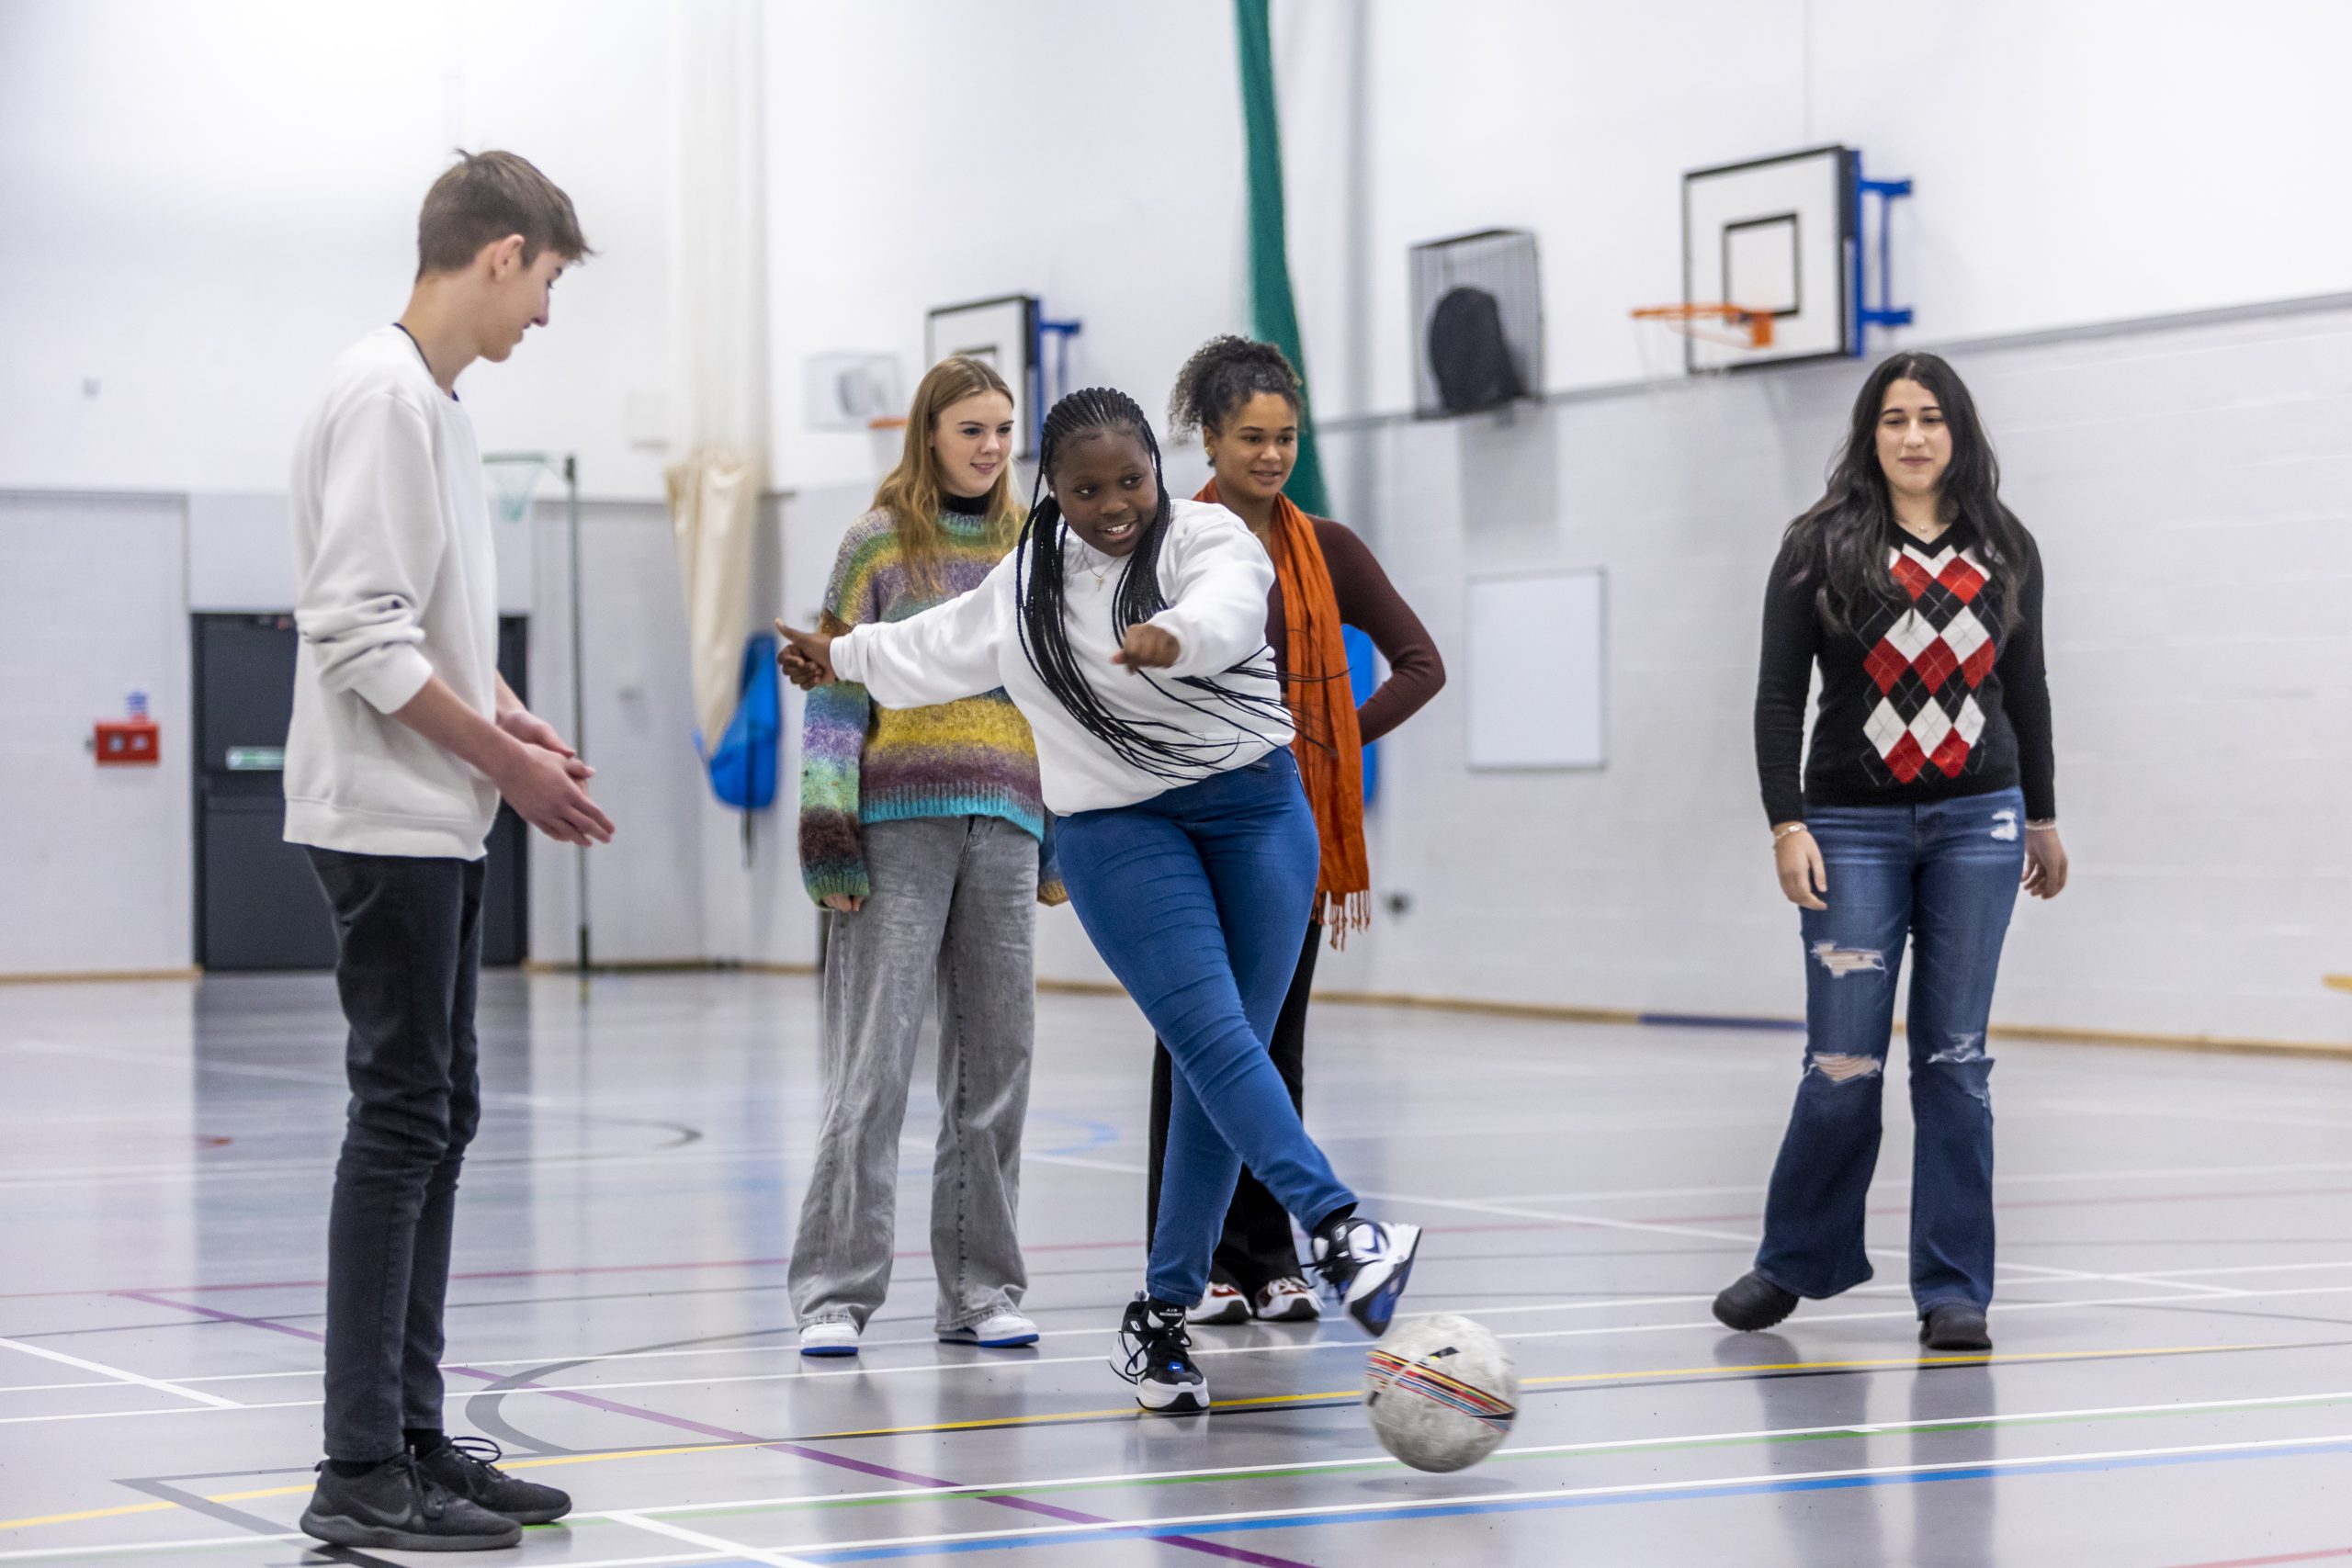 A group of young people play football in a gym